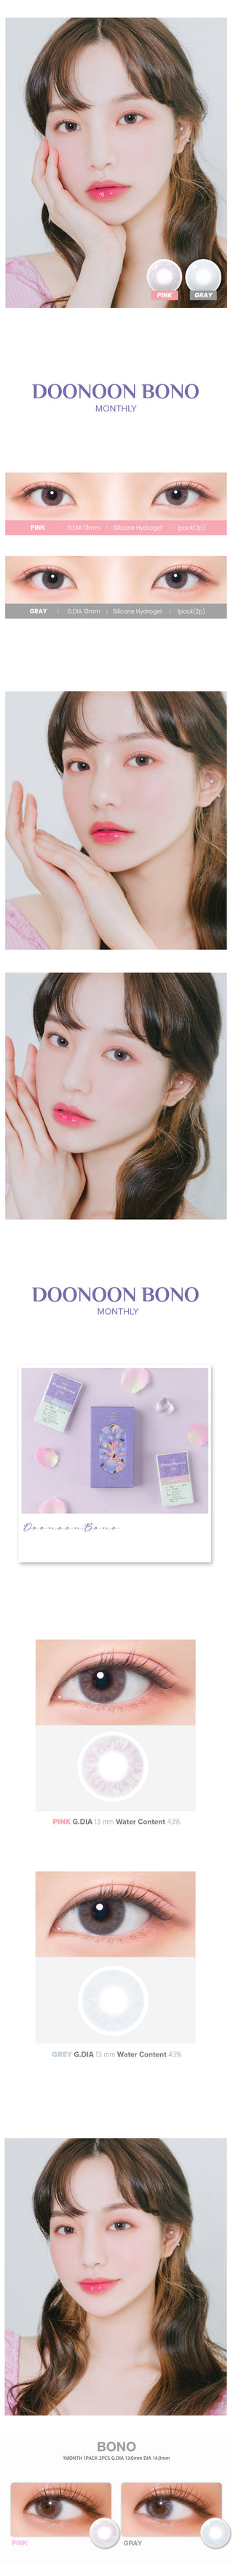 Variety of DooNoon Bono Pink contact lens colors displayed, with closeups of an eye wearing the contact lens colors, and with a model wearing the contact lens colors showing realistic eye-enlarging effect from various angles.